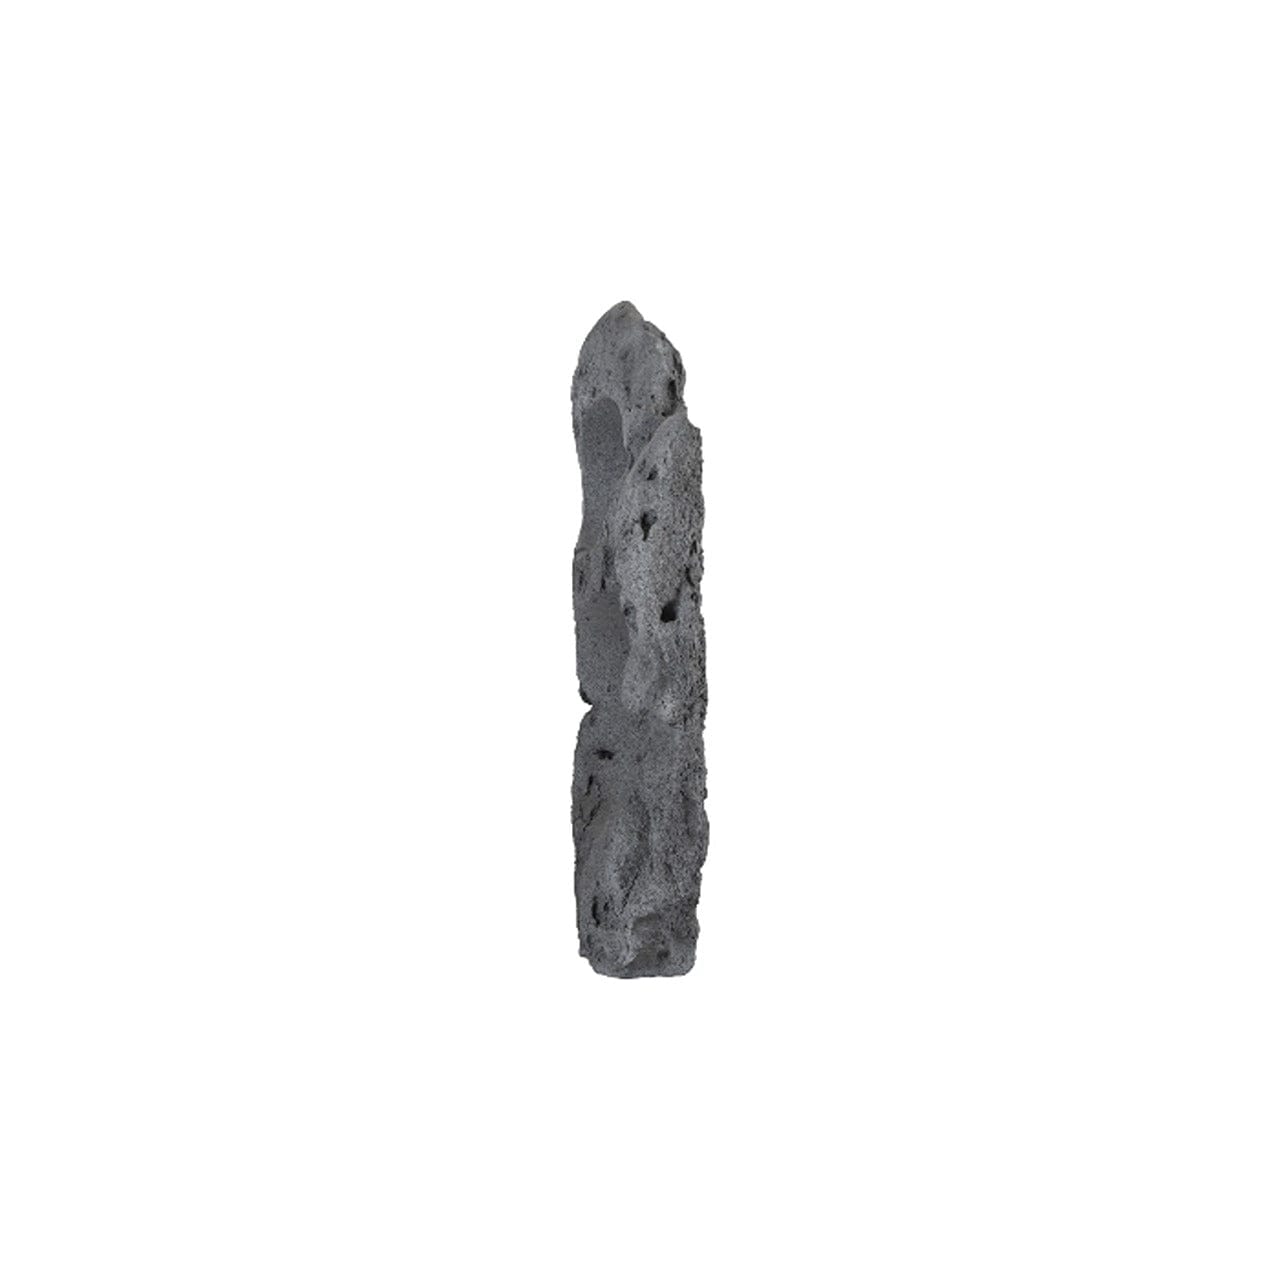 Colossal Charcoal Stone C Cast Stone Sculpture